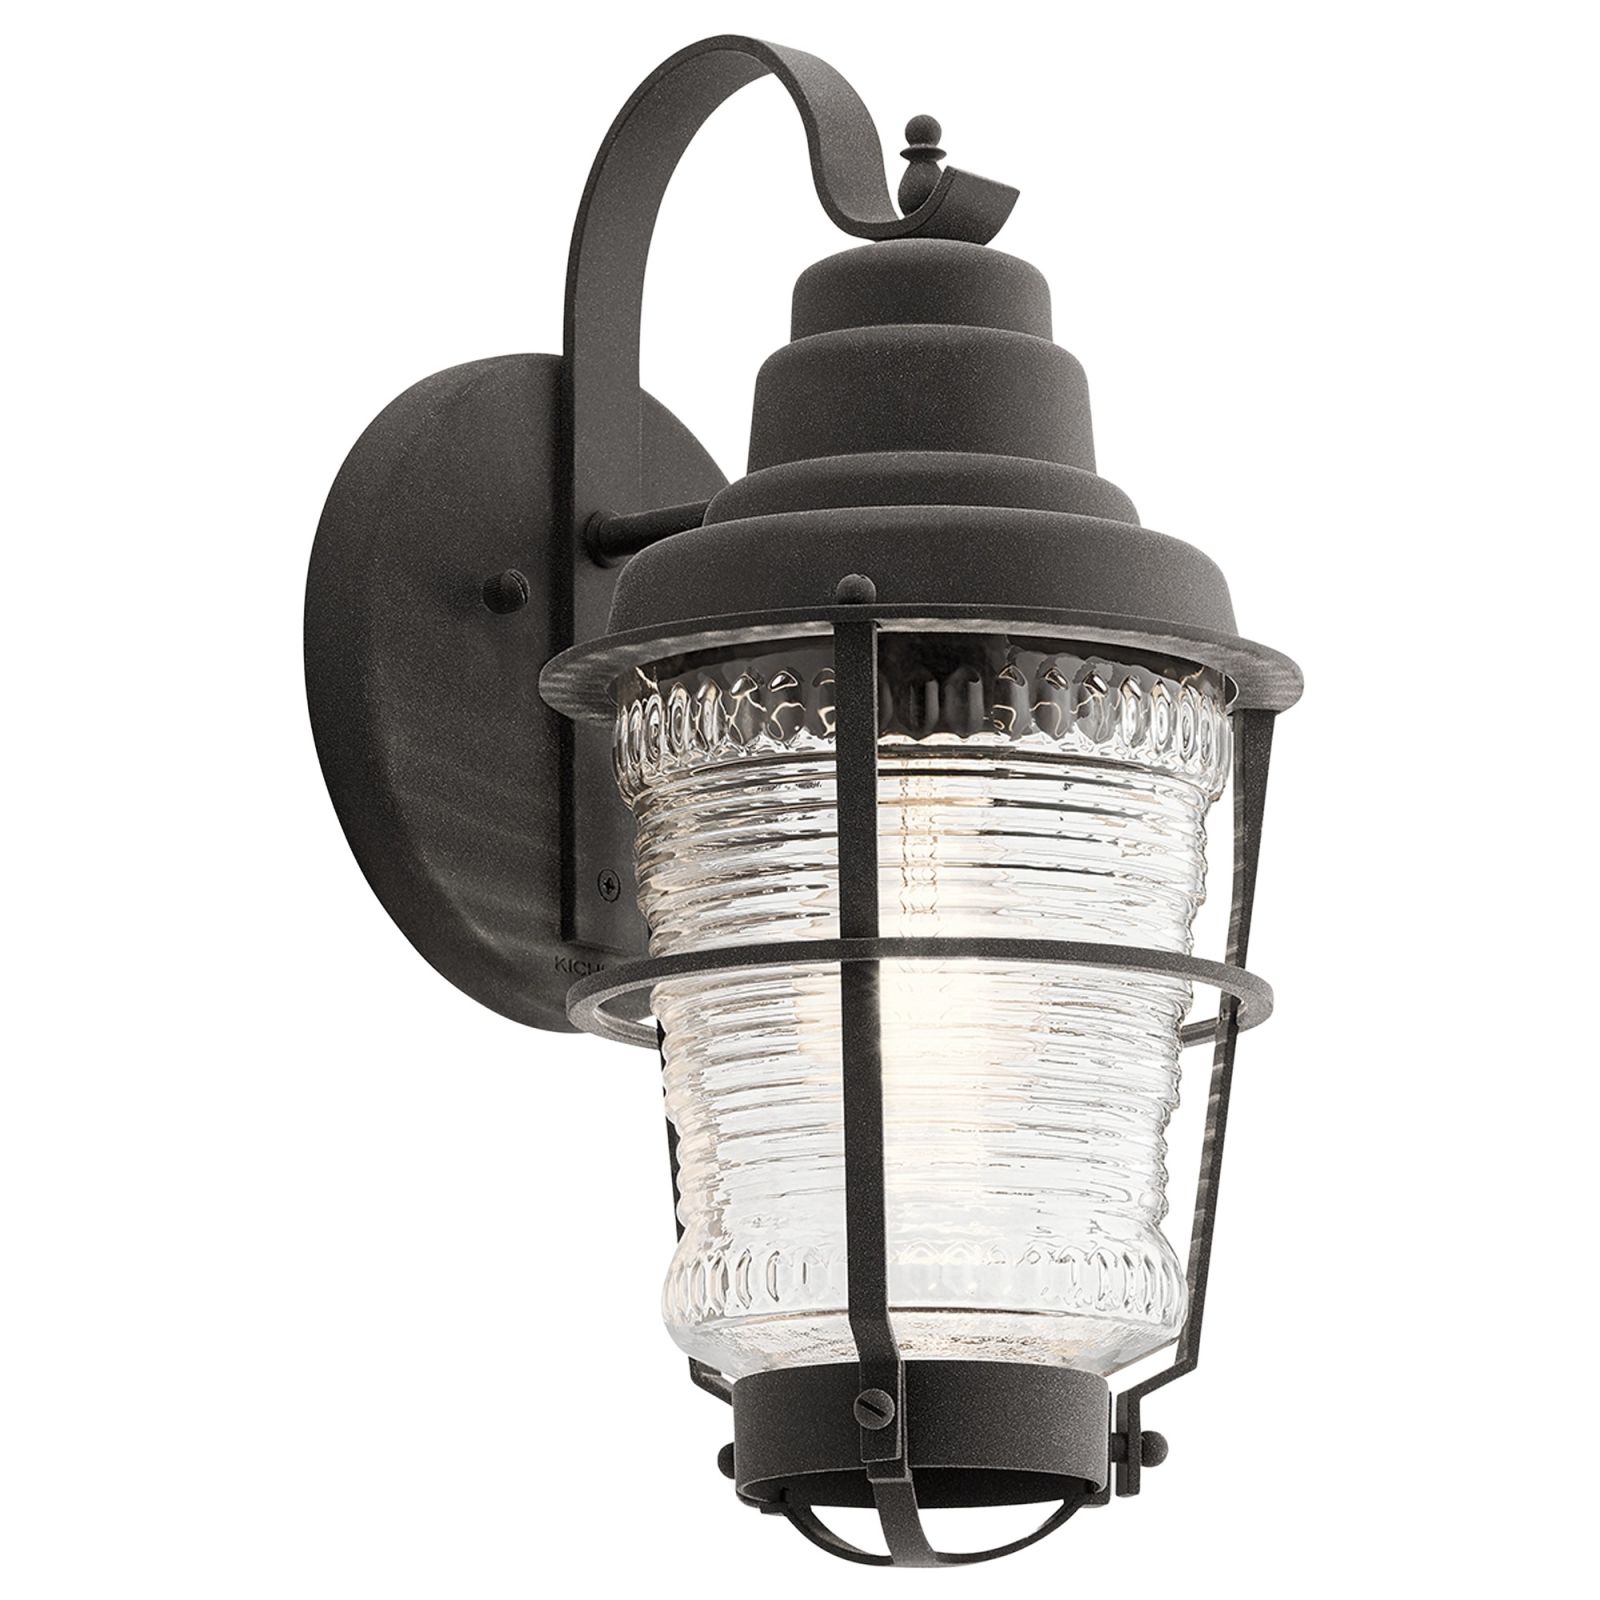 Chance Harbour Exterior Wall Lantern in Weathered Zinc in a choice of sizes